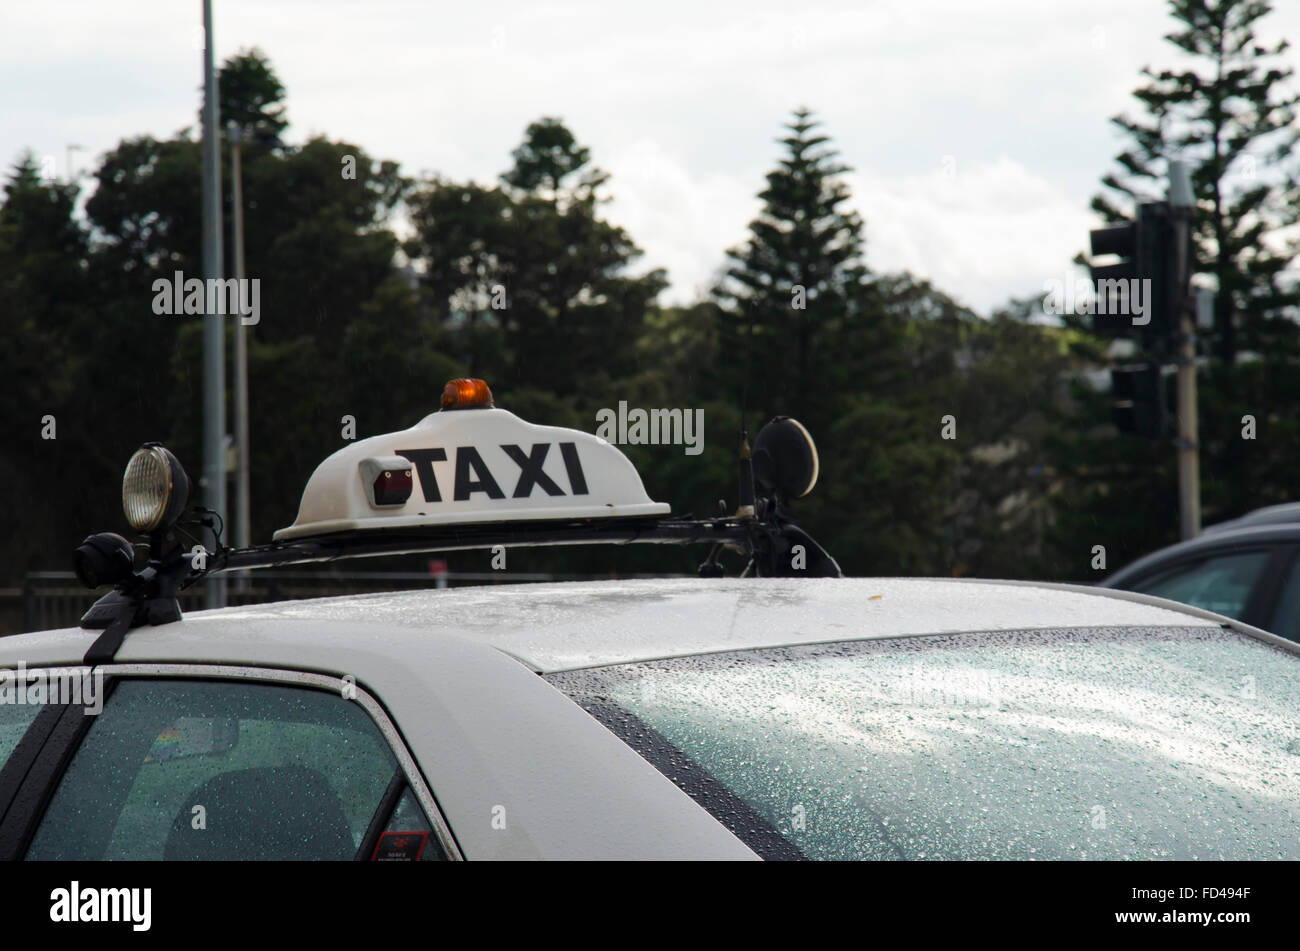 Viewed from behind with only the taxi sign and roof visible, a wet Sydney taxi stands waiting for a fare in the rain Stock Photo